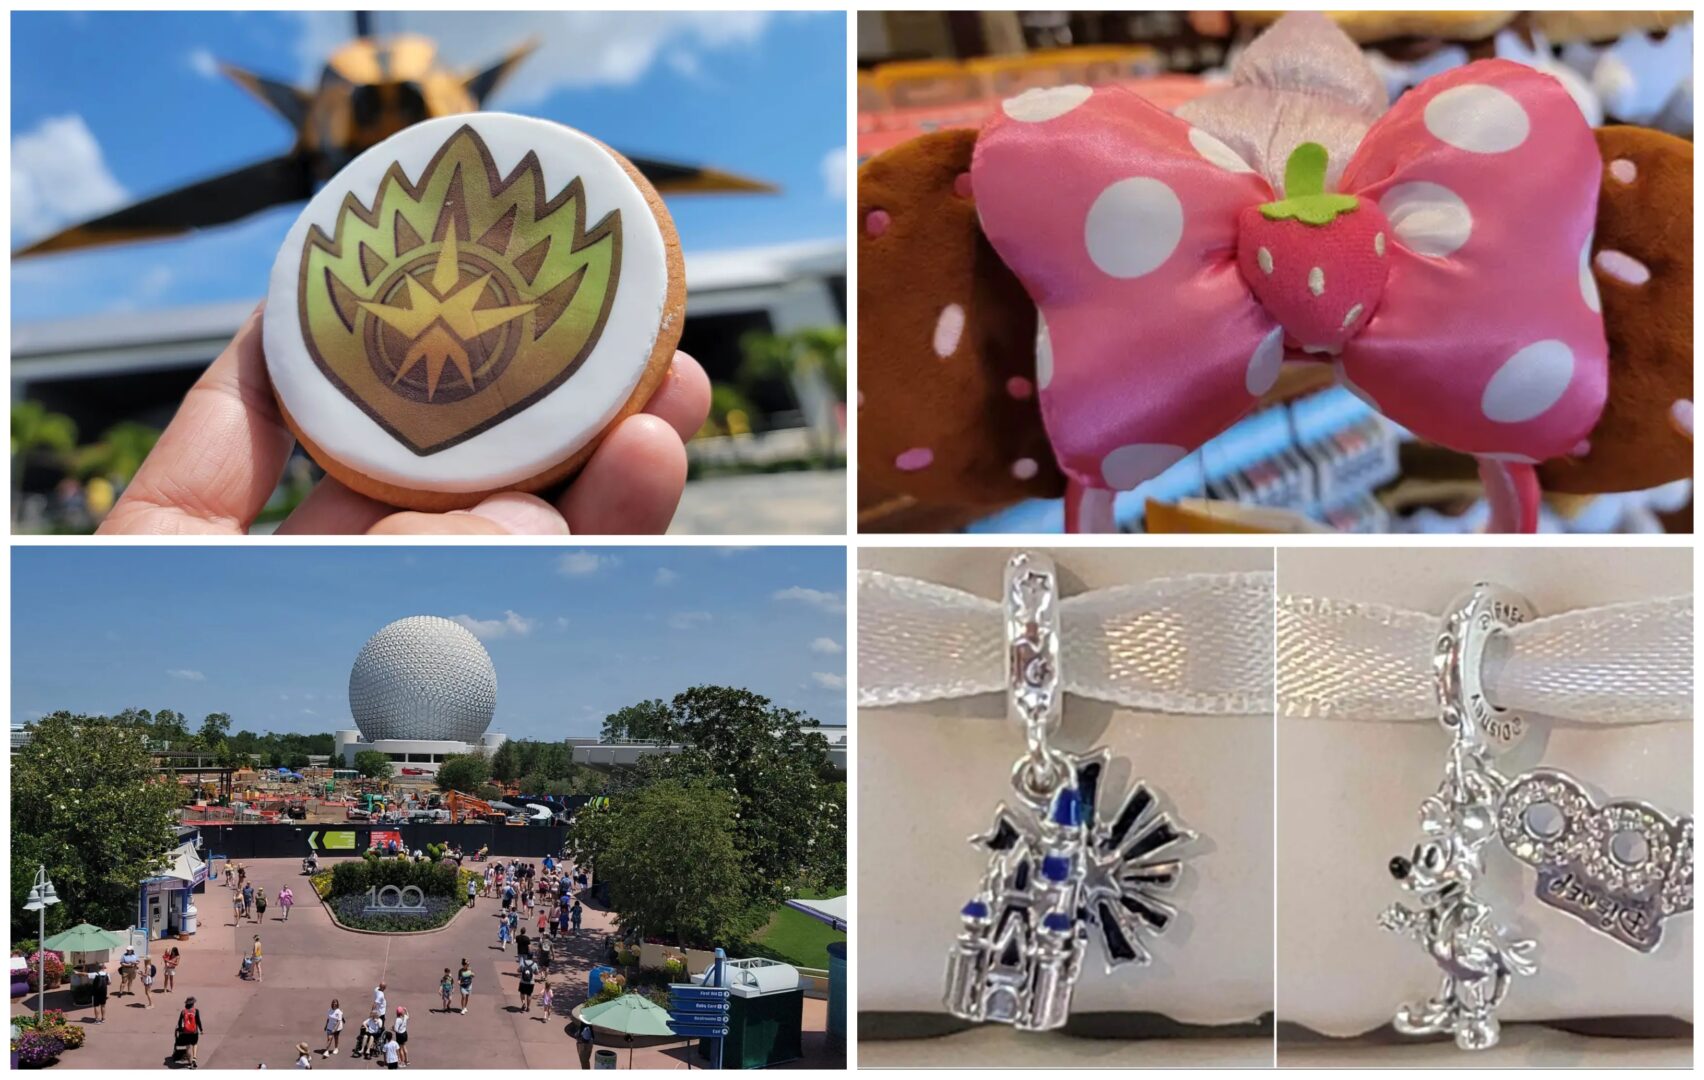 Disney News Highlights: Happy Mother’s Day at Walt Disney World, How You Can Celebrate Mom, New Disney Pandora Charms, New Disney100 Cast Member Name Tags